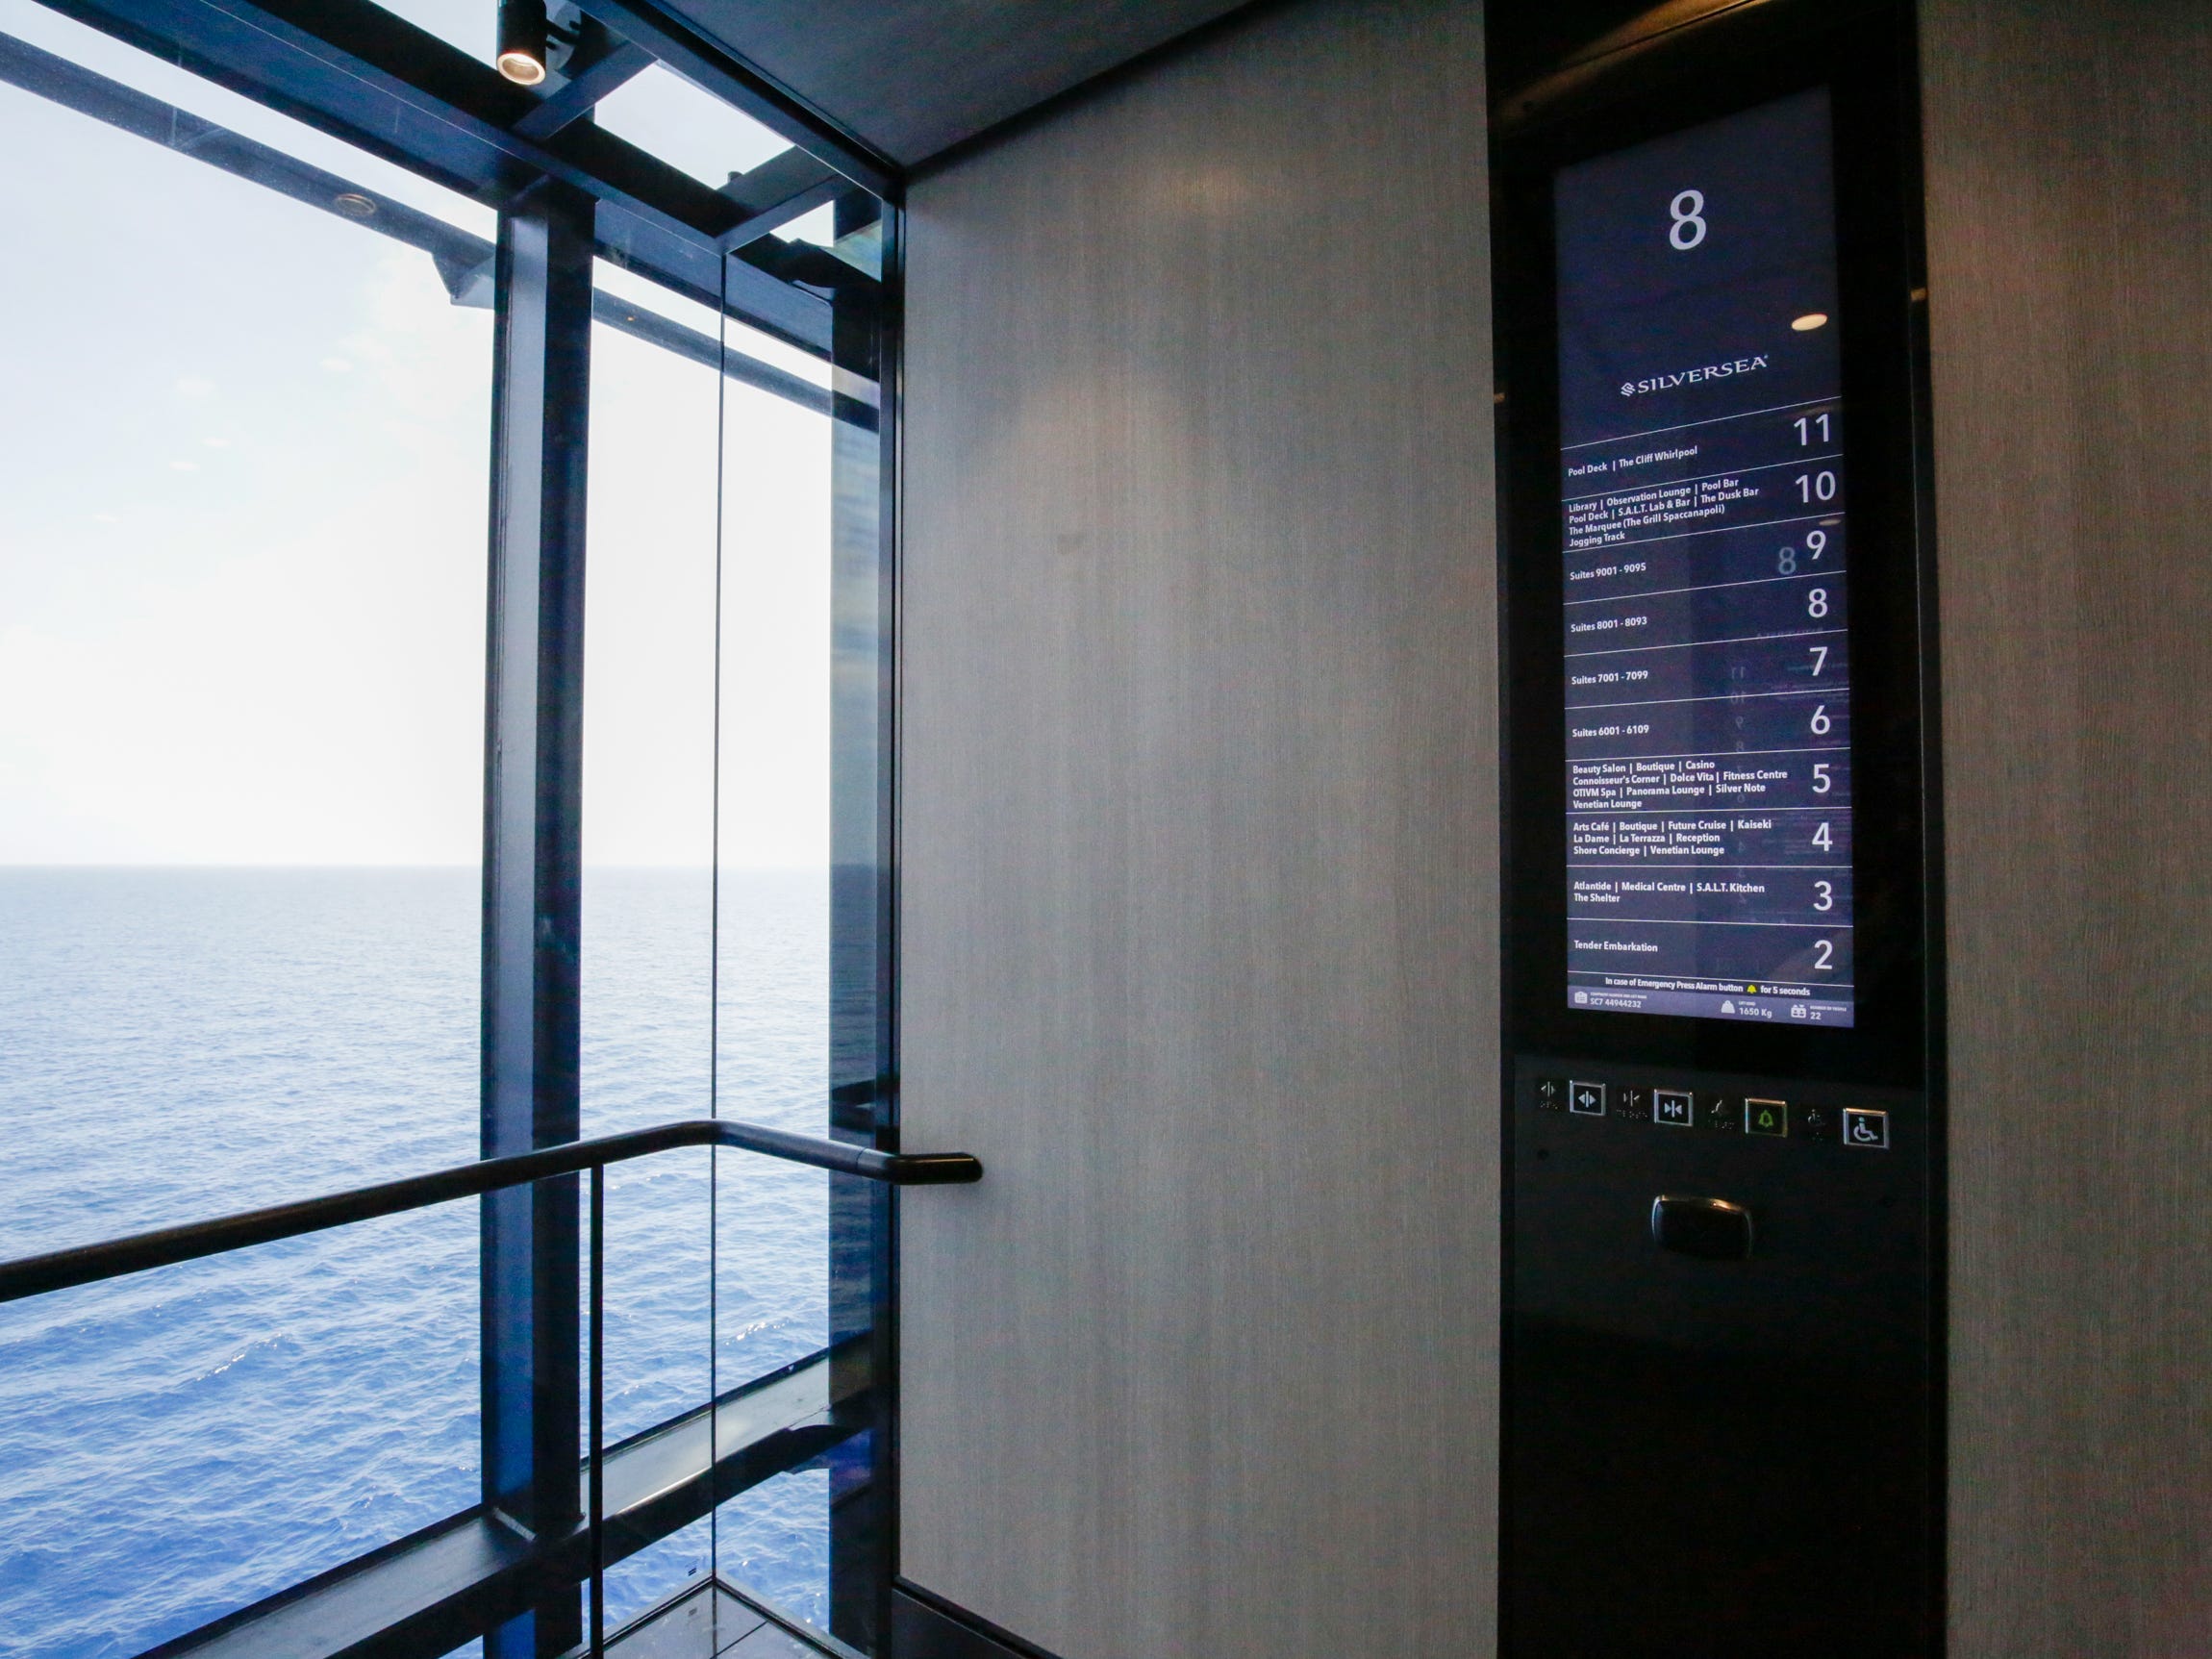 <p>Before Silver Ray, I would've scoffed if you had told me one of my favorite amenities on a cruise ship would be the elevators. But alas, it seems not all of them are created equal.</p><p>On most cruise ships, the elevators are located at the center of the vessel and flanked by corridors on either side.</p><p>Like the pool, all six of Silver Ray's elevators are located by the edge of the ship — half port side, half starboard side — and lined with glass walls, giving riders sweeping views of the ship's surroundings.</p><p>Not to be dramatic, but I've never seen a more beautiful elevator.</p>